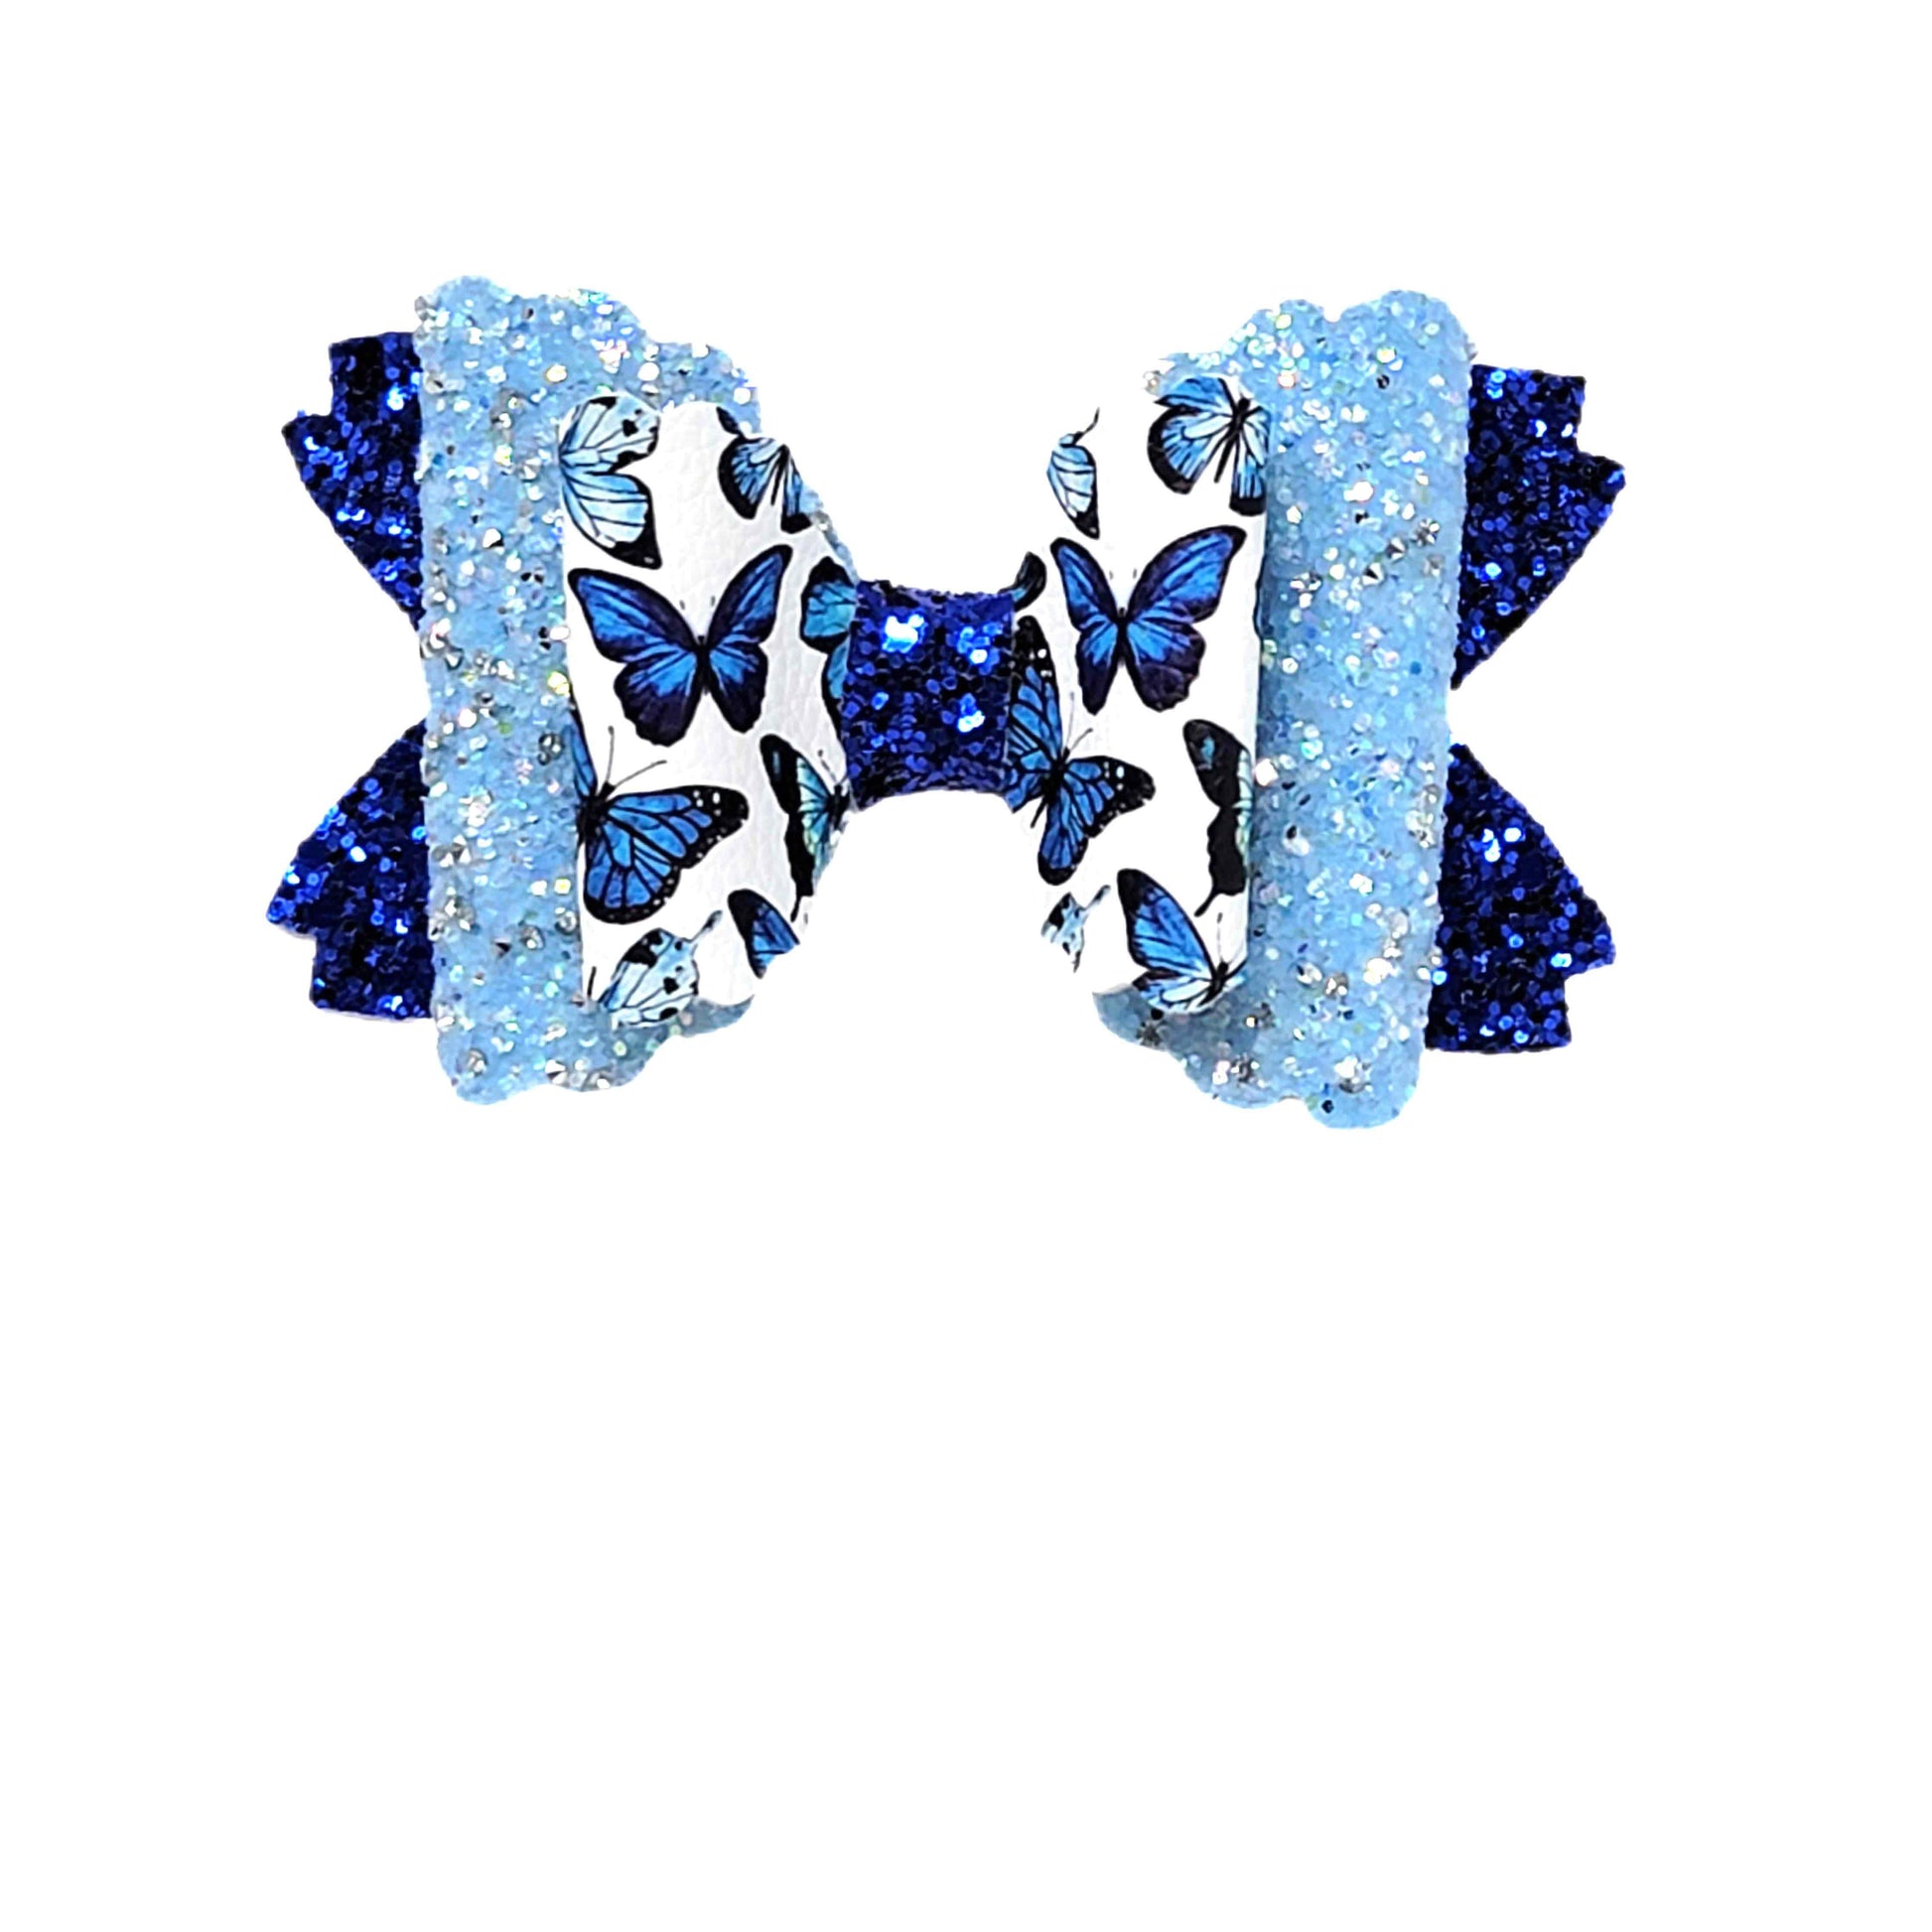 Blue Butterflies Double Scalloped Daisy Bow 4"